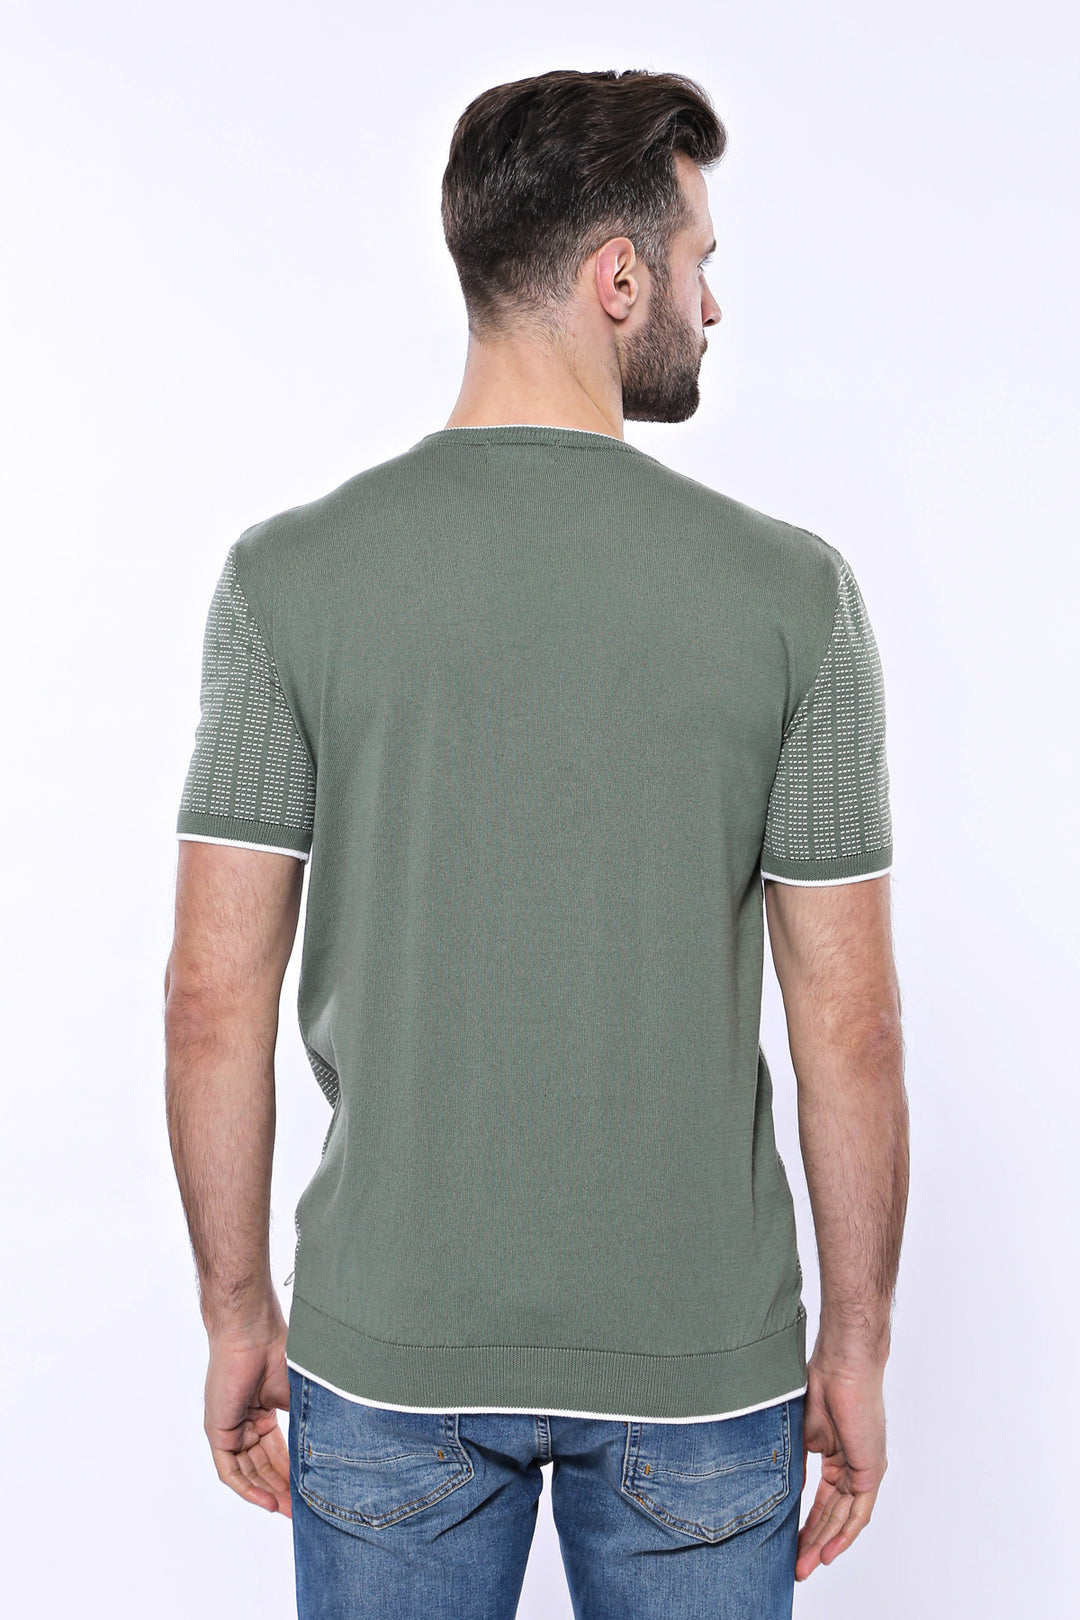 Circle Neck Patterned Green Knitted T-Shirt - Wessi